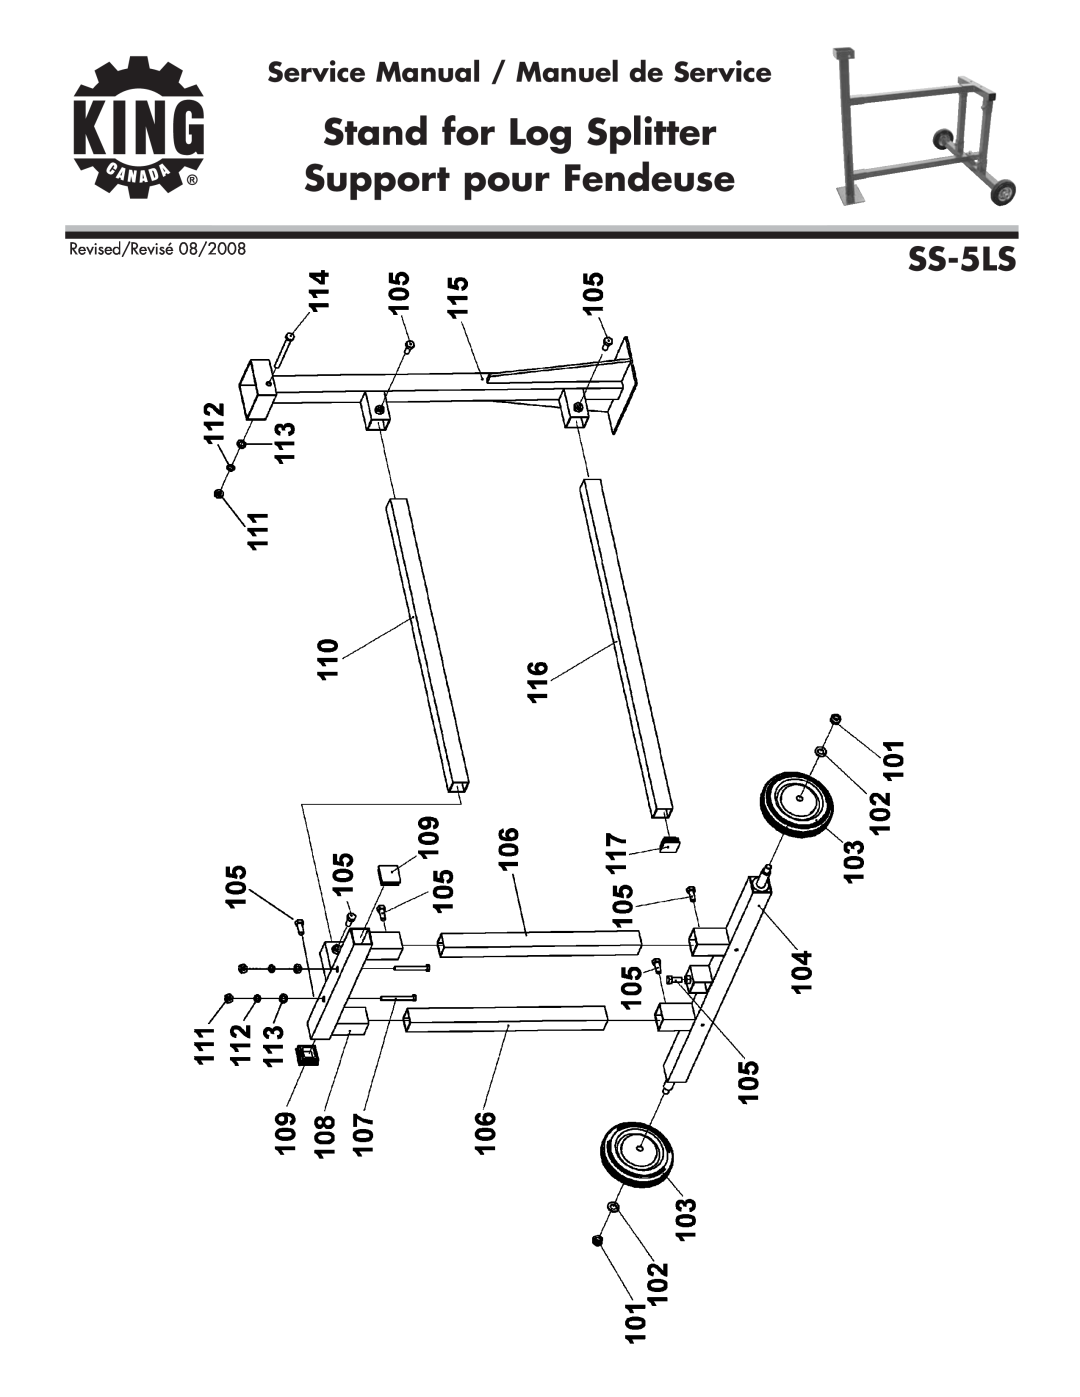 King Canada SS-5LS service manual Stand for Log Splitter Support pour Fendeuse, Revised/Revisé 08/2008 